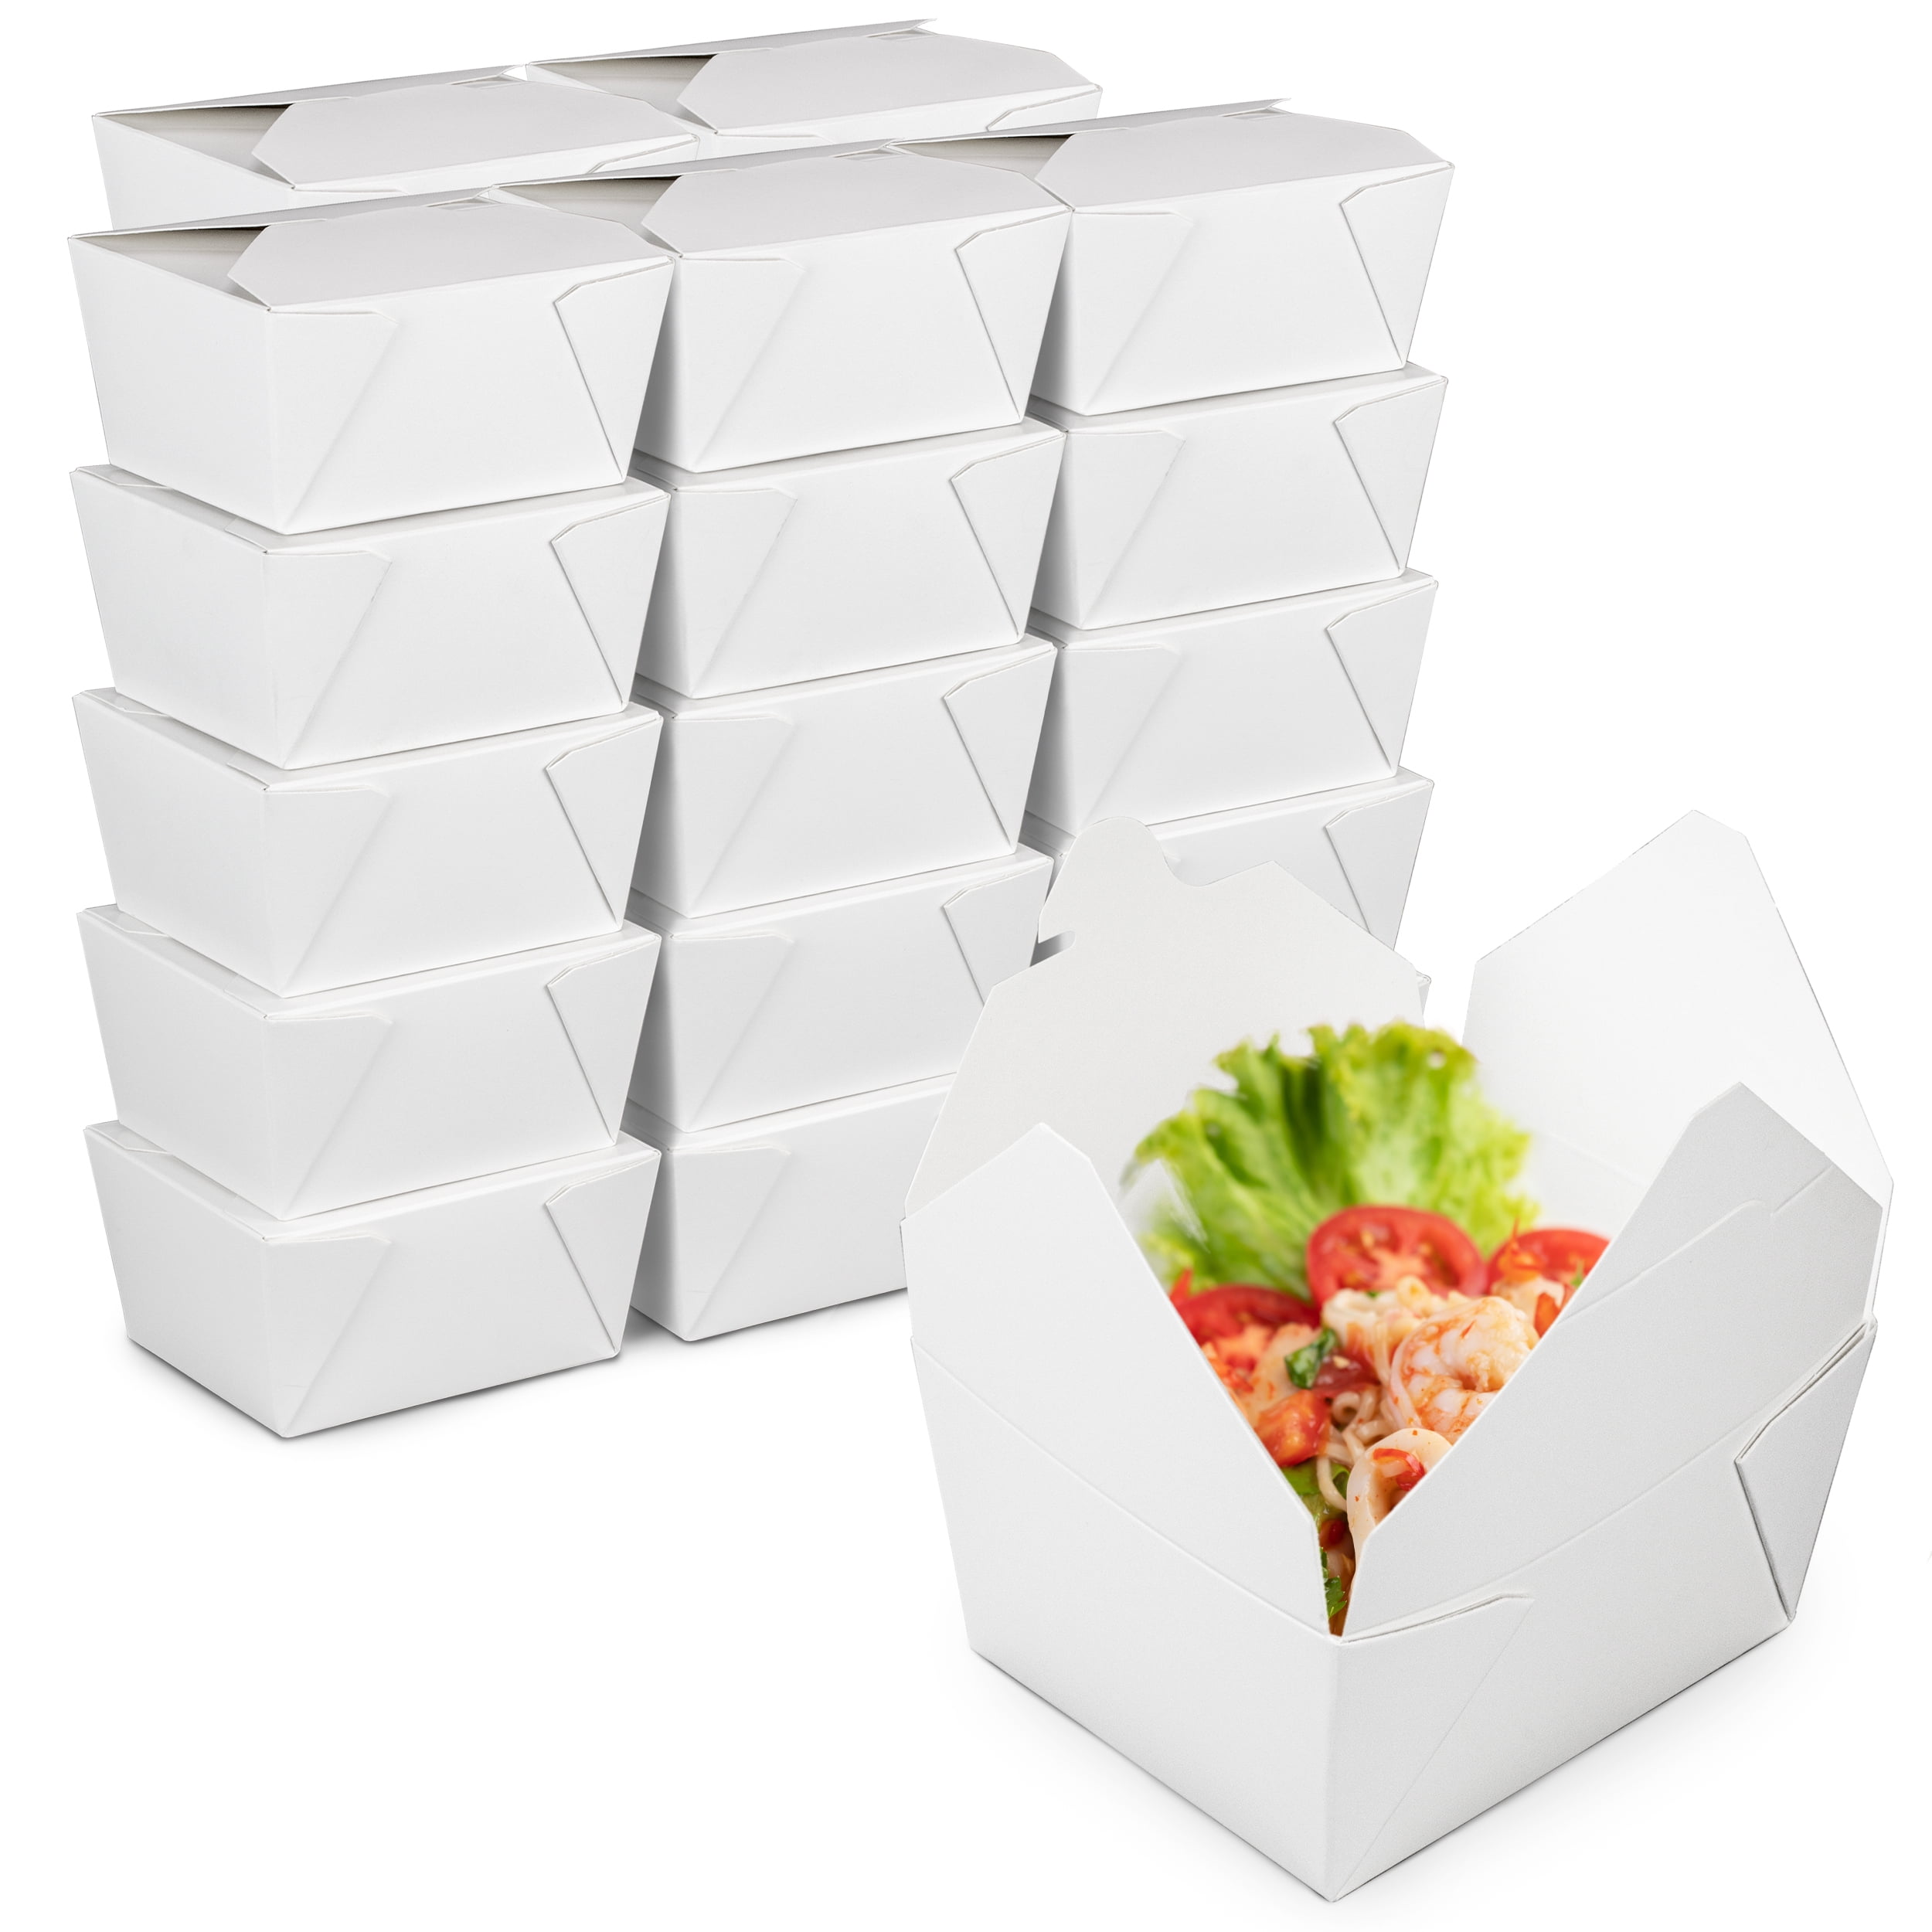 [50 Pack] 54 oz Paper Take Out Containers 8.5 x 6 x 2 - White Lunch Meal  Food Boxes #2, Disposable Storage To Go Packaging, Microwave Safe, Leak